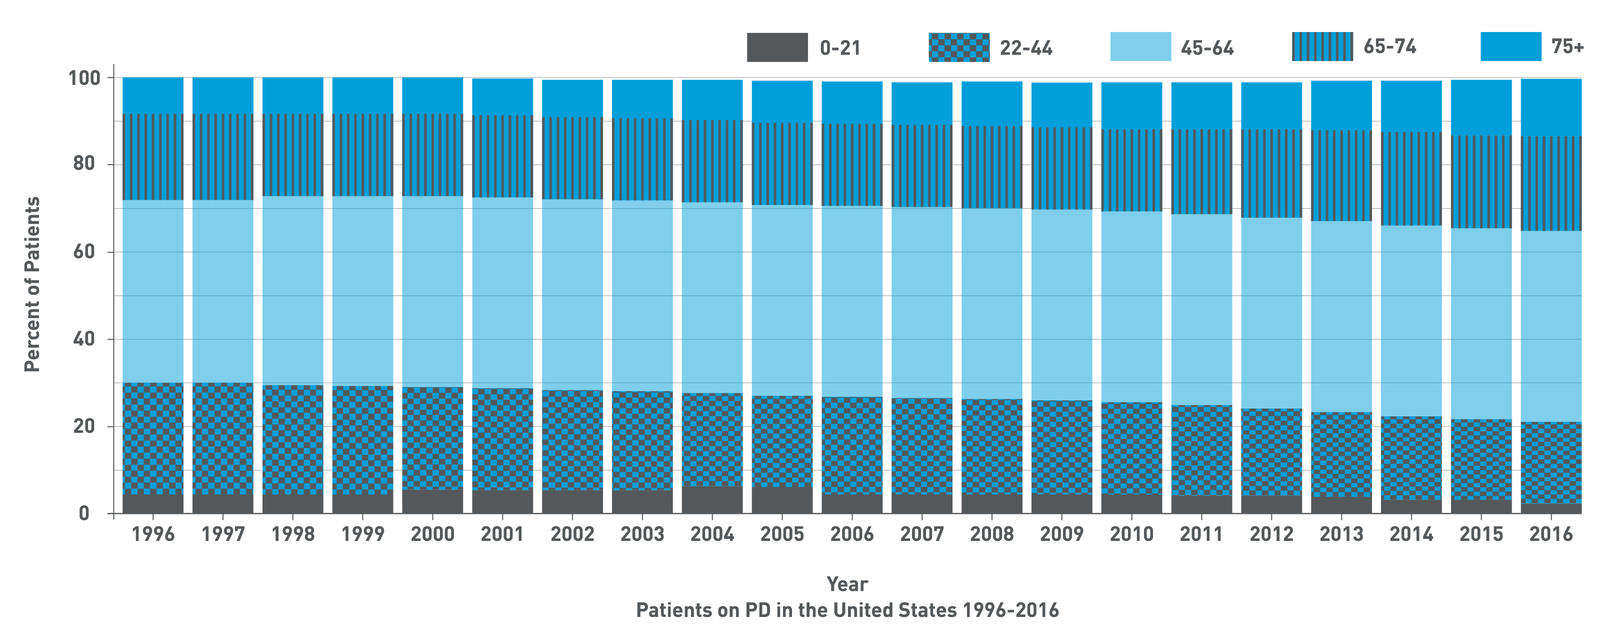 Average age of patient on PD in the US is increasing - graph